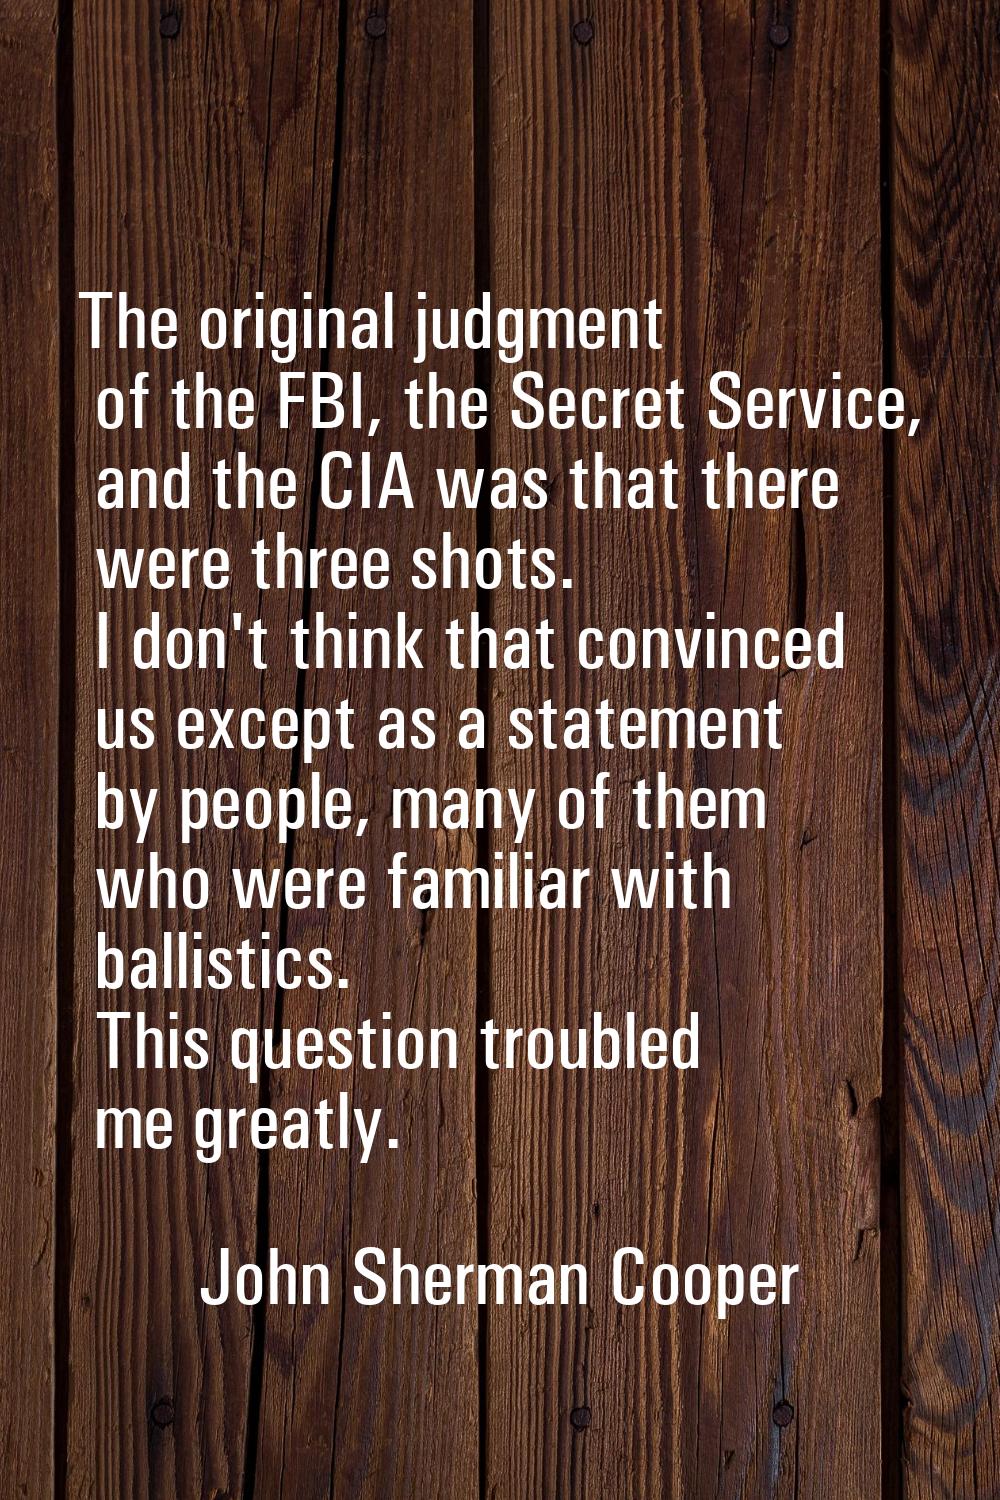 The original judgment of the FBI, the Secret Service, and the CIA was that there were three shots. 